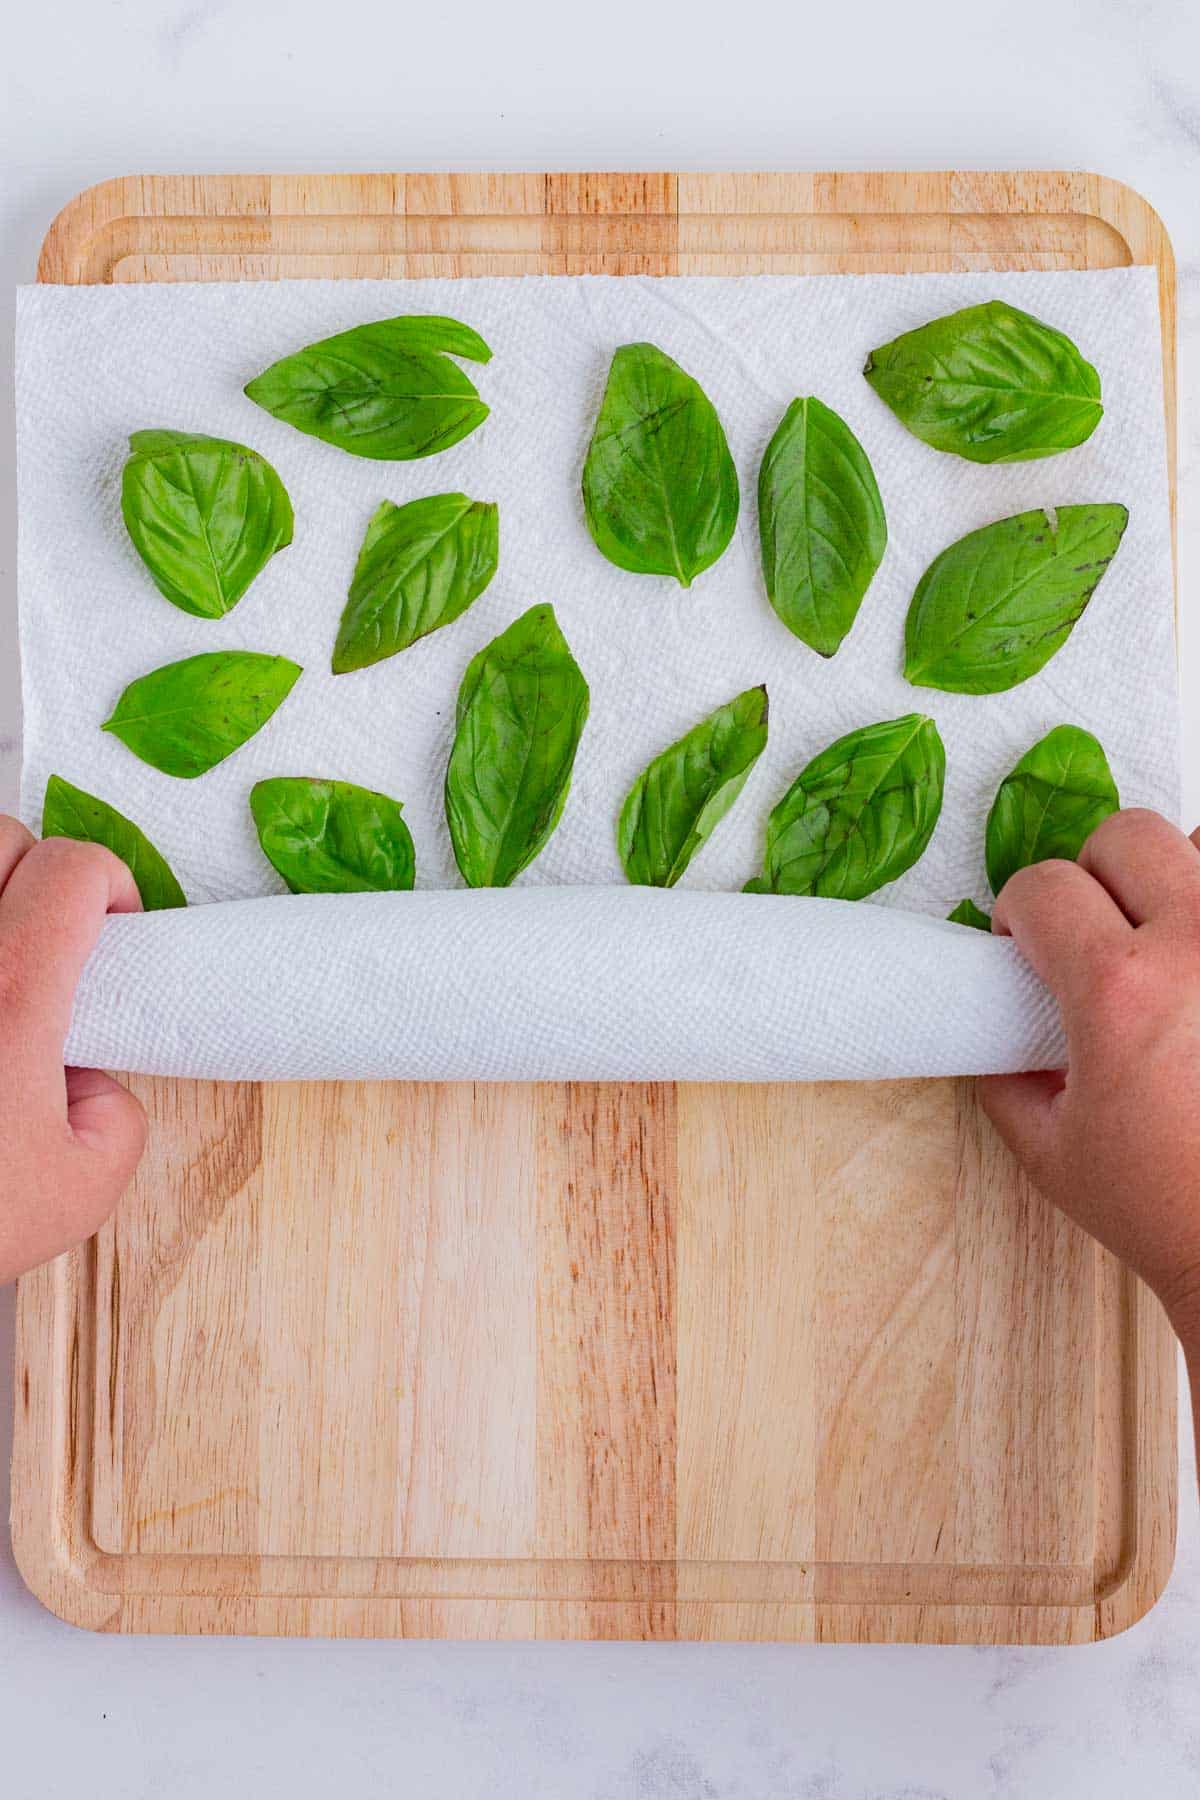 Fresh basil leaves being rolled up into a dry paper towel.